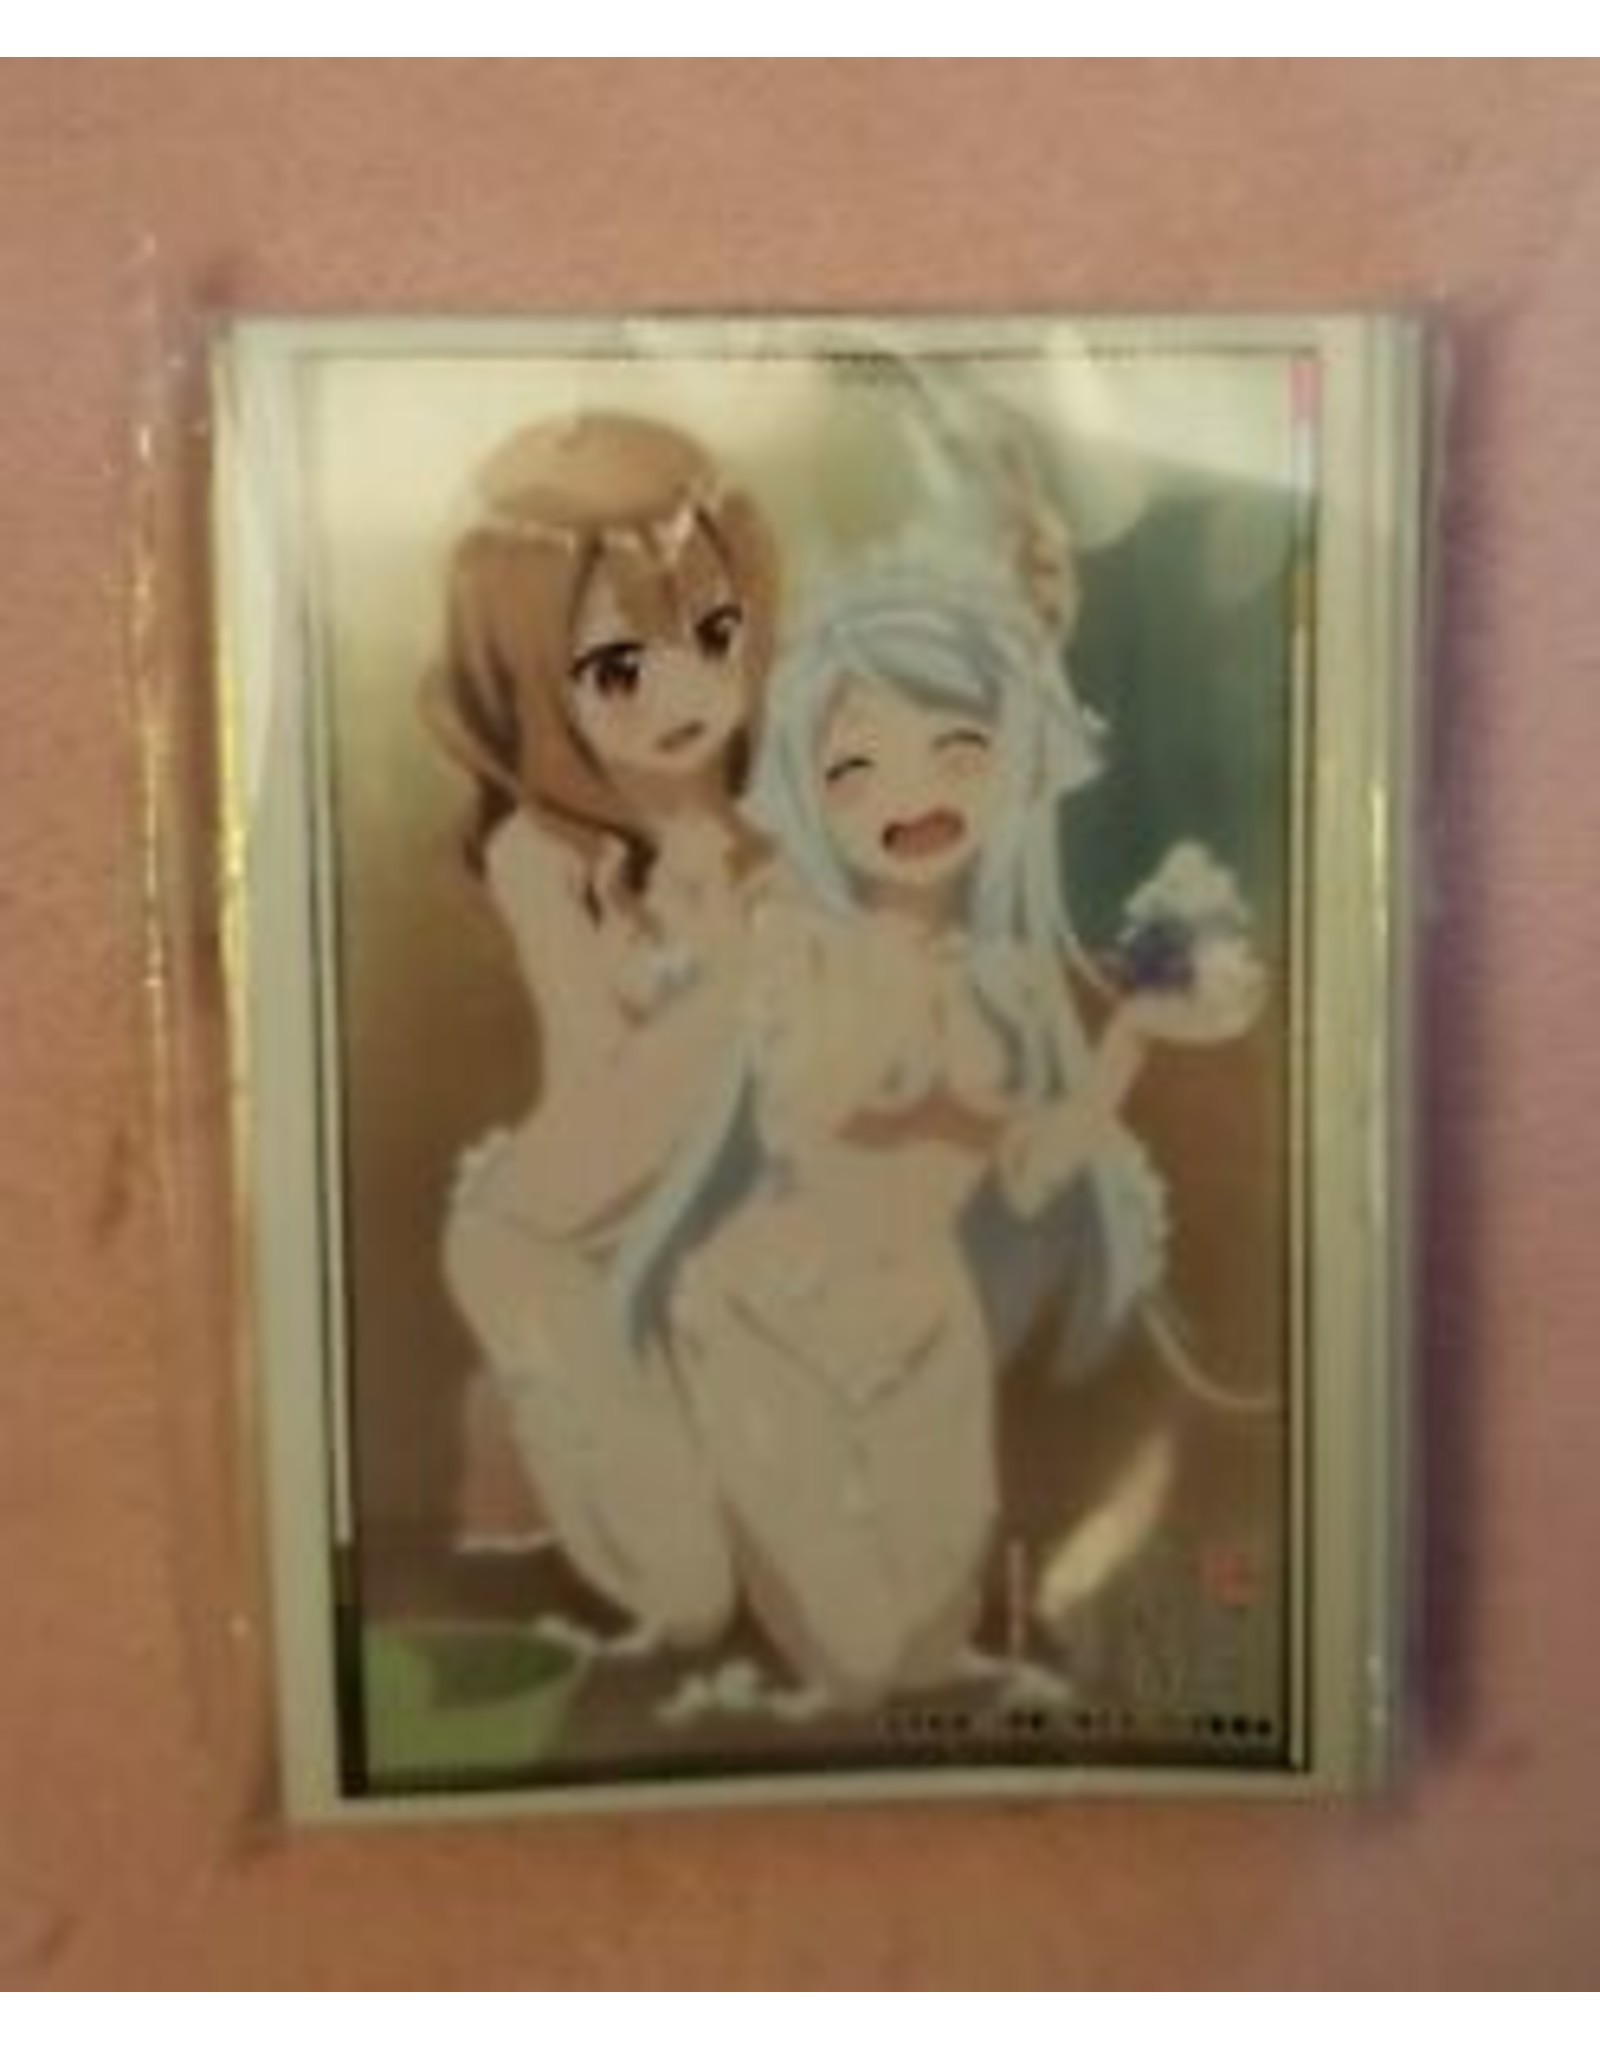 Bushiroad Sleeve Collection Vol. 261 A Sister Is All You Need